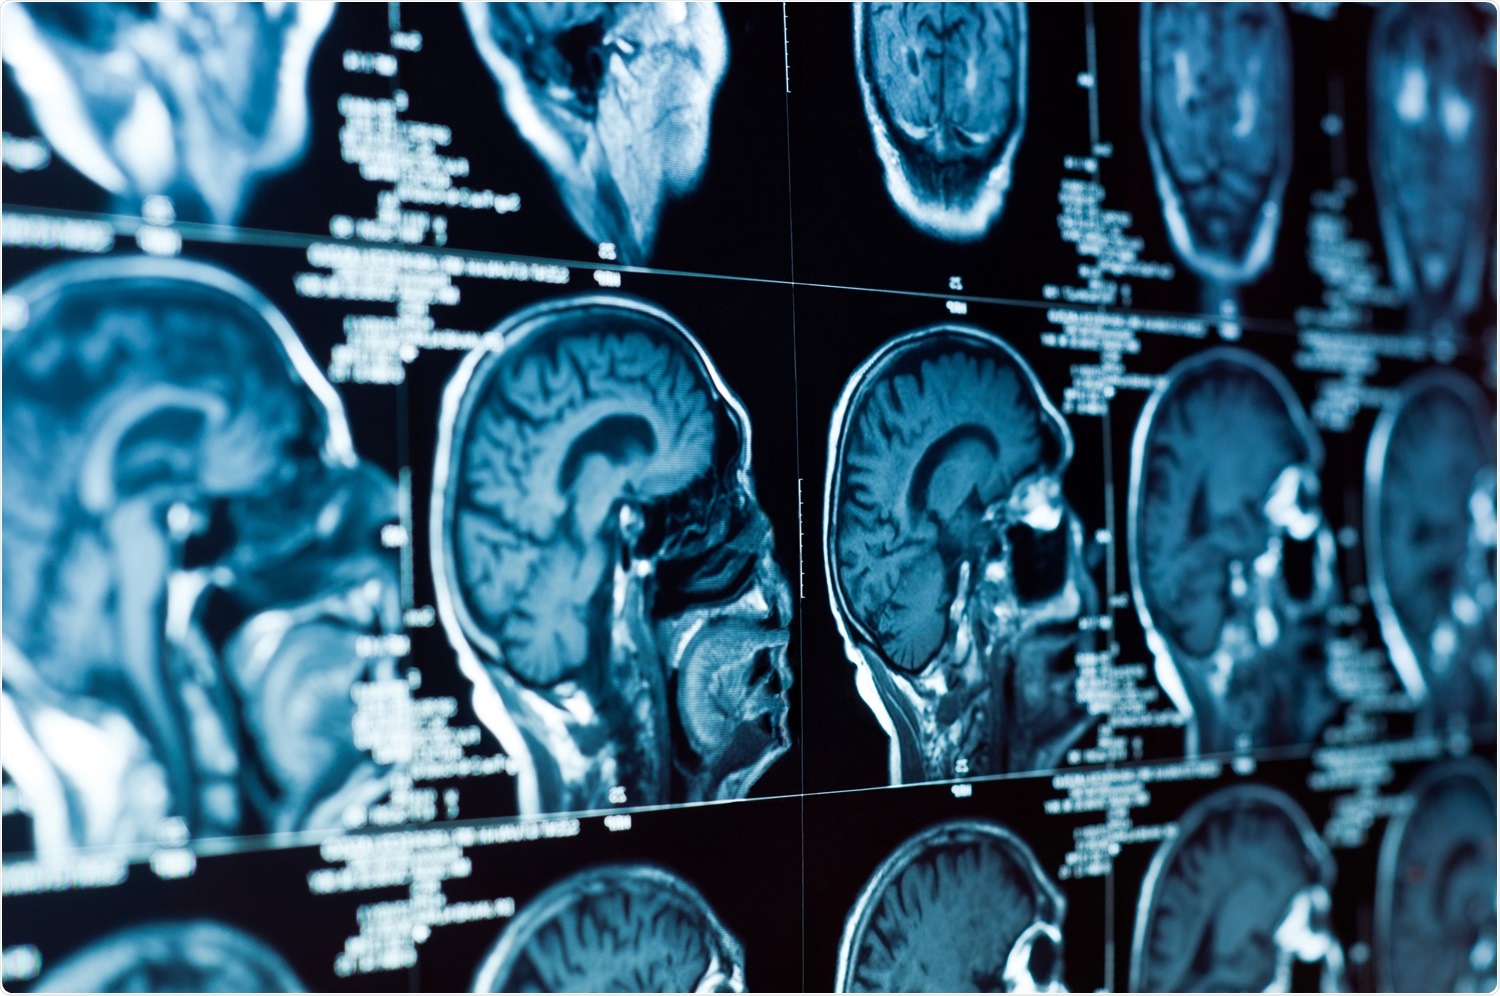 Study: Brain MRI in SARS-CoV-2 pneumonia patients with newly developed neurological manifestations suggestive of brain involvement. Image Credit: SvedOliver / Shutterstock